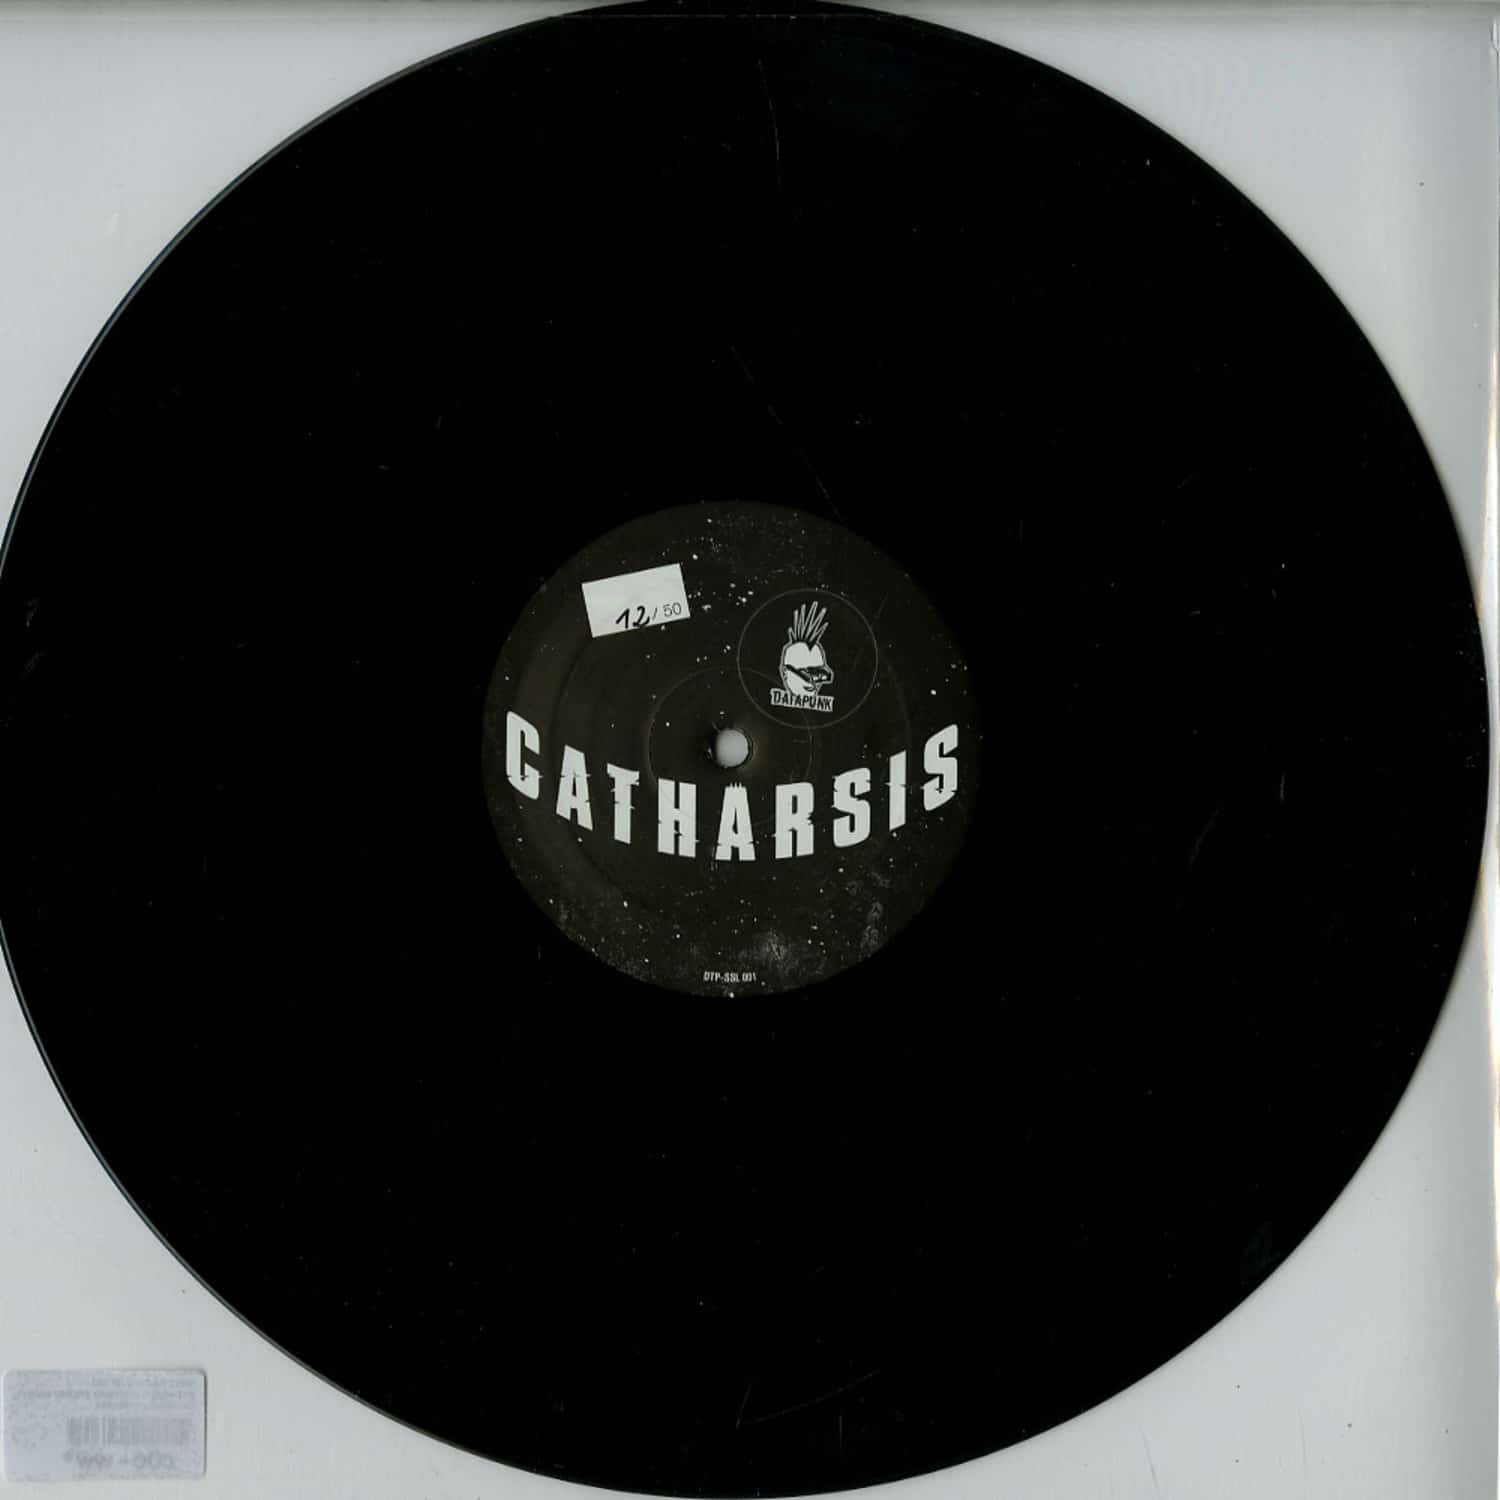 Well Known Artist - CATHARSIS 